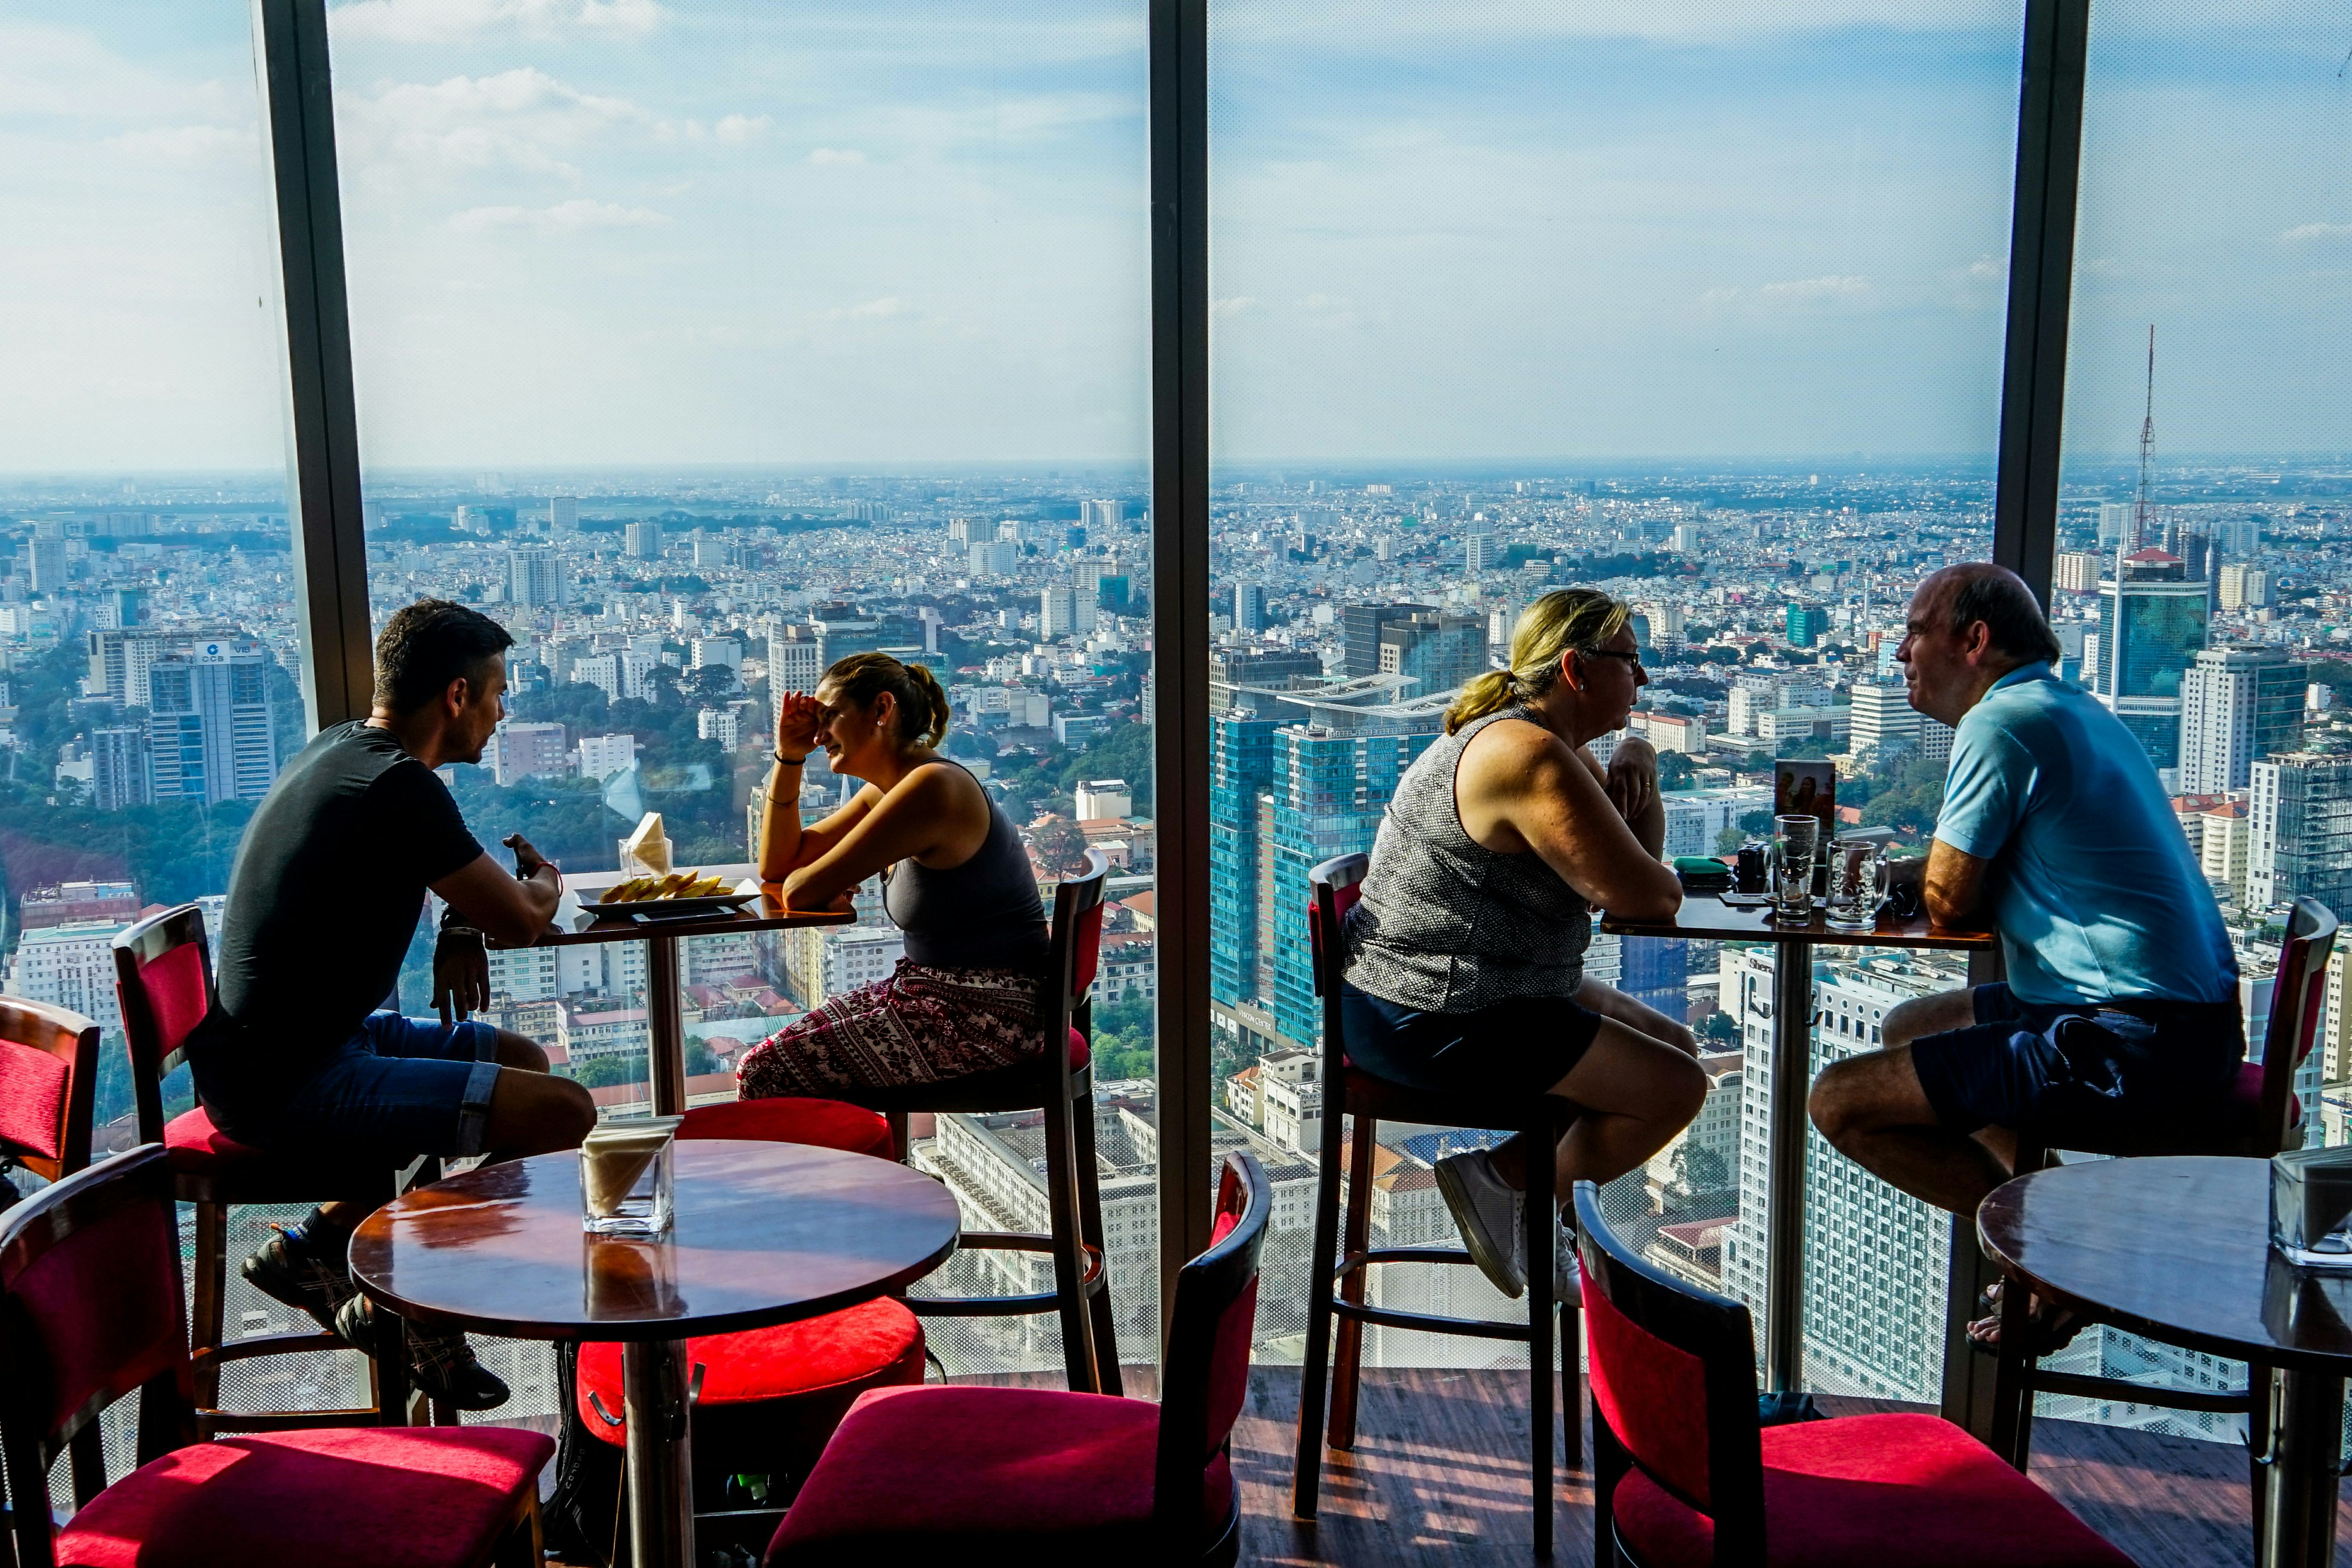 Patrons look over the city from 50 floors above at Café Eon inside the Bitexco Tower in Ho Chi Minh City